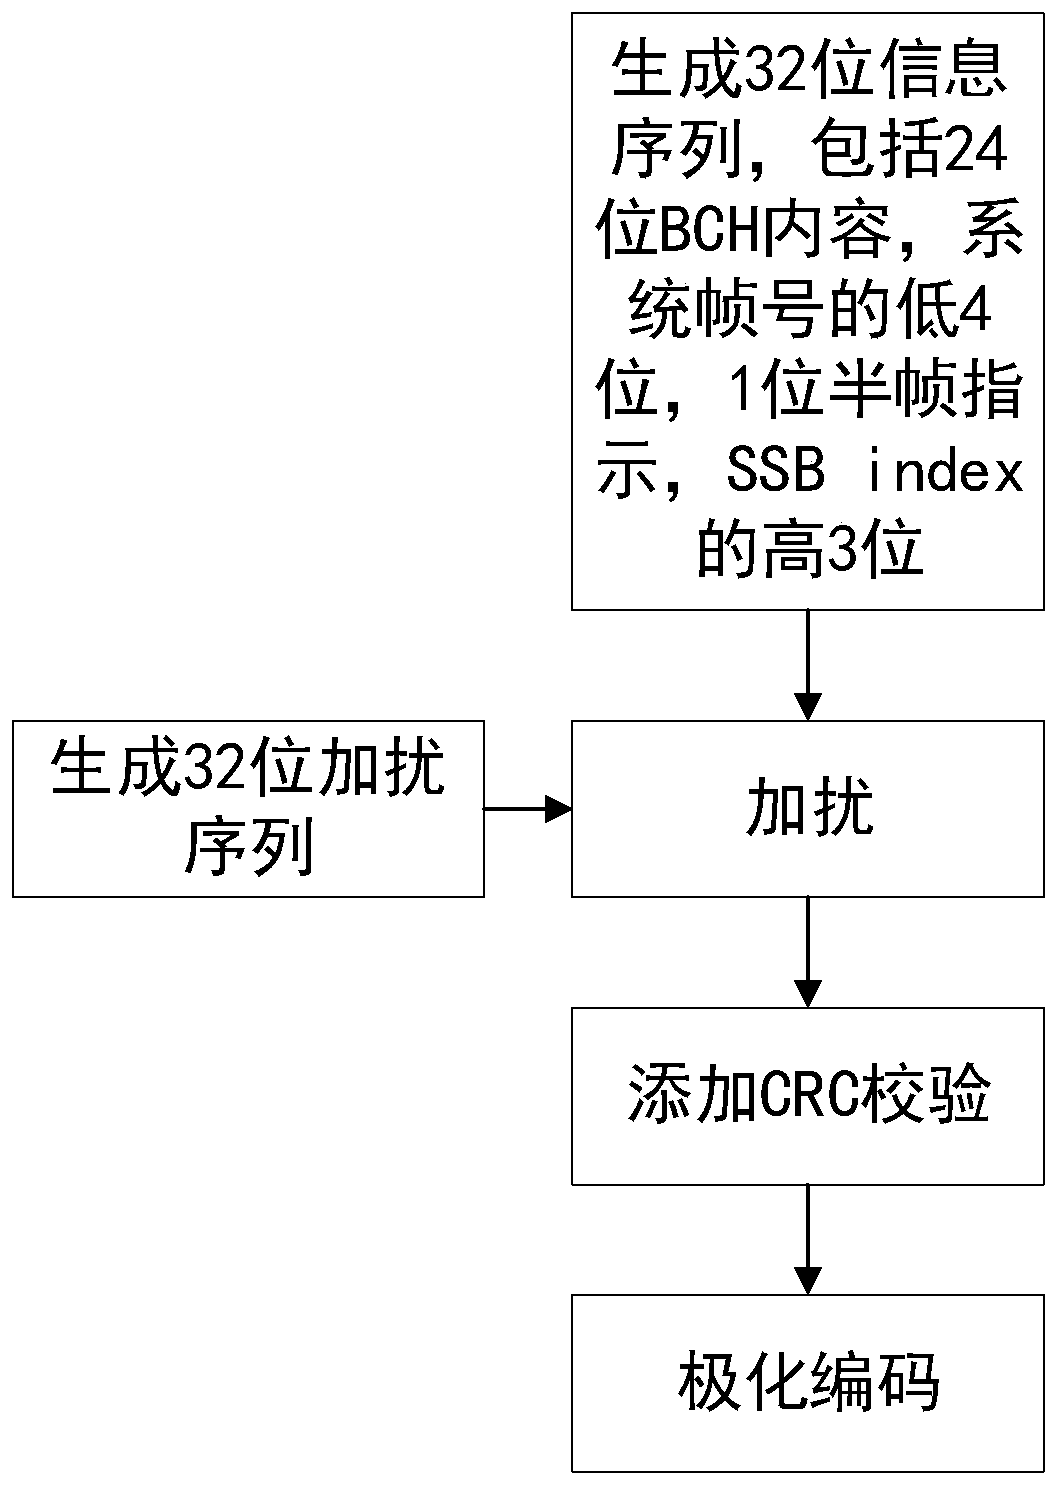 A 5G broadcast channel merging receiving method based on a polarization code